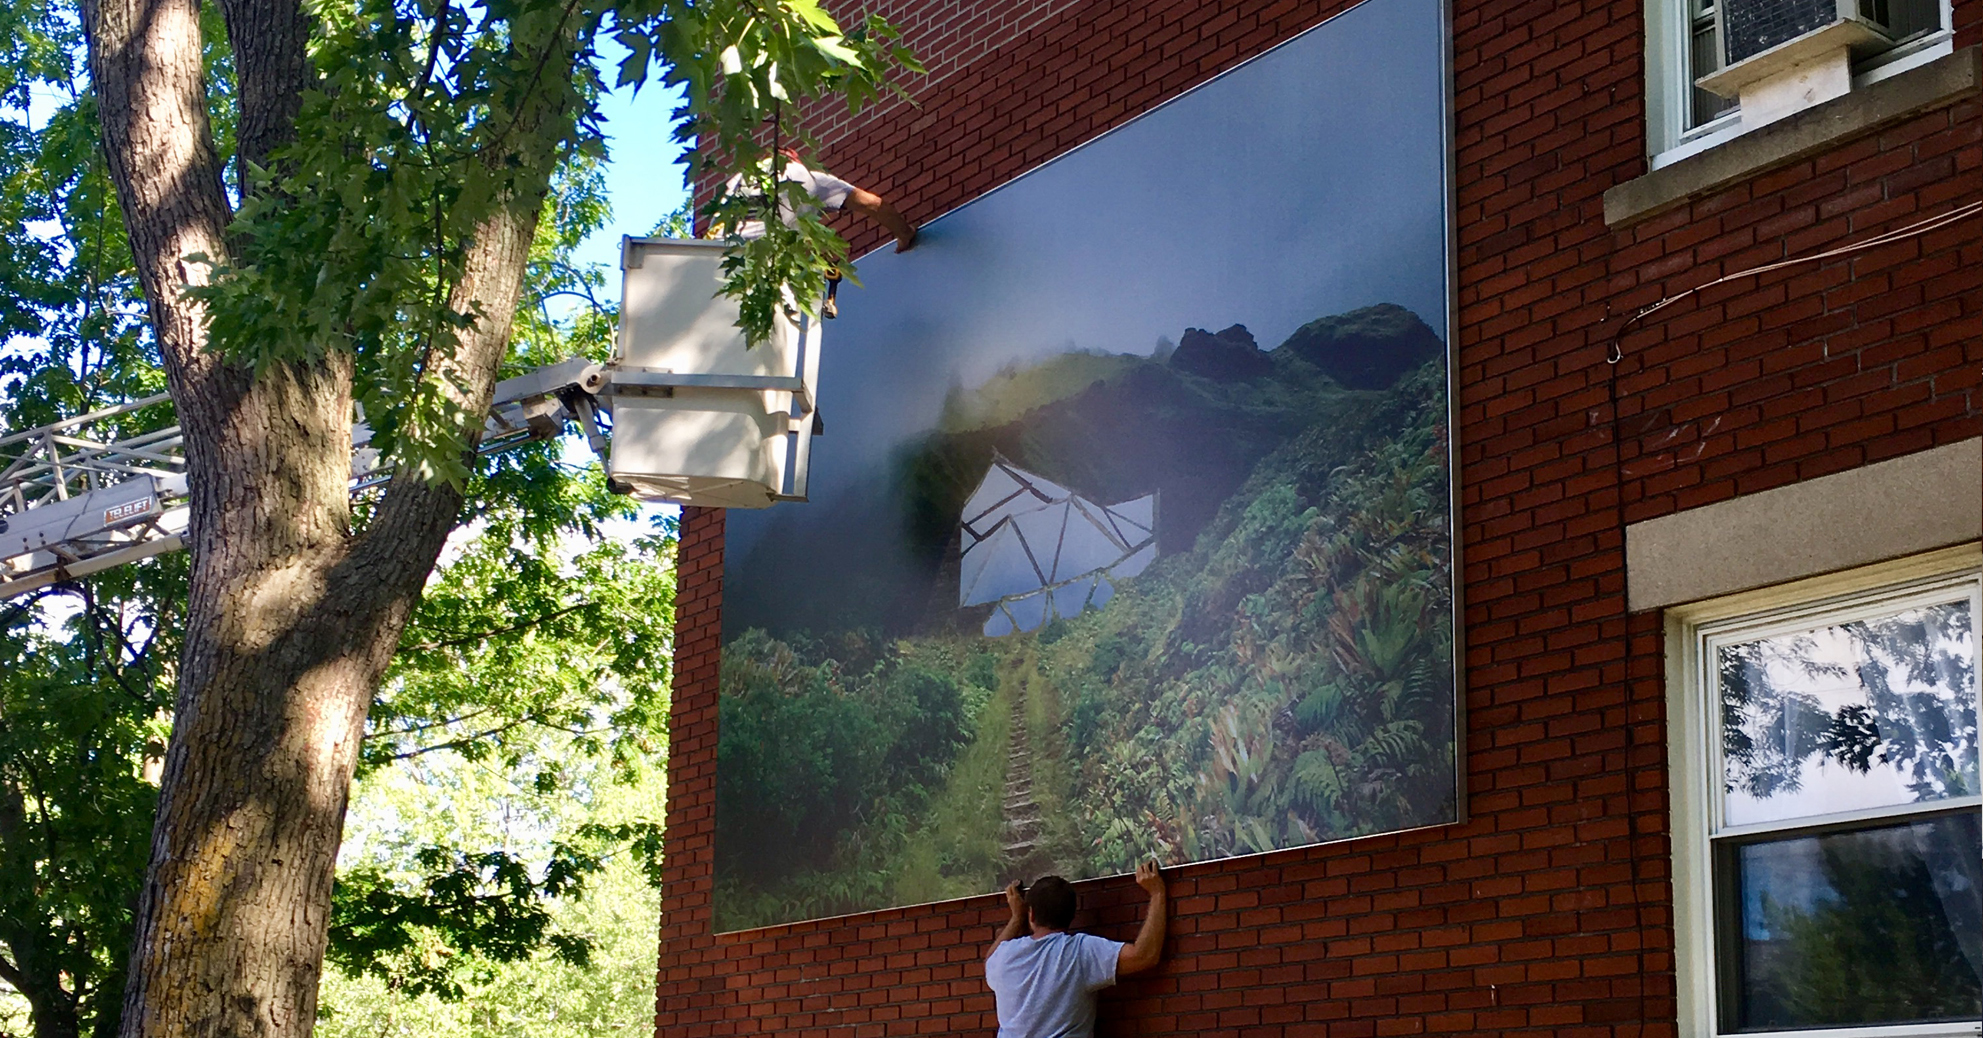 Installation of new works in the Open Air Museum